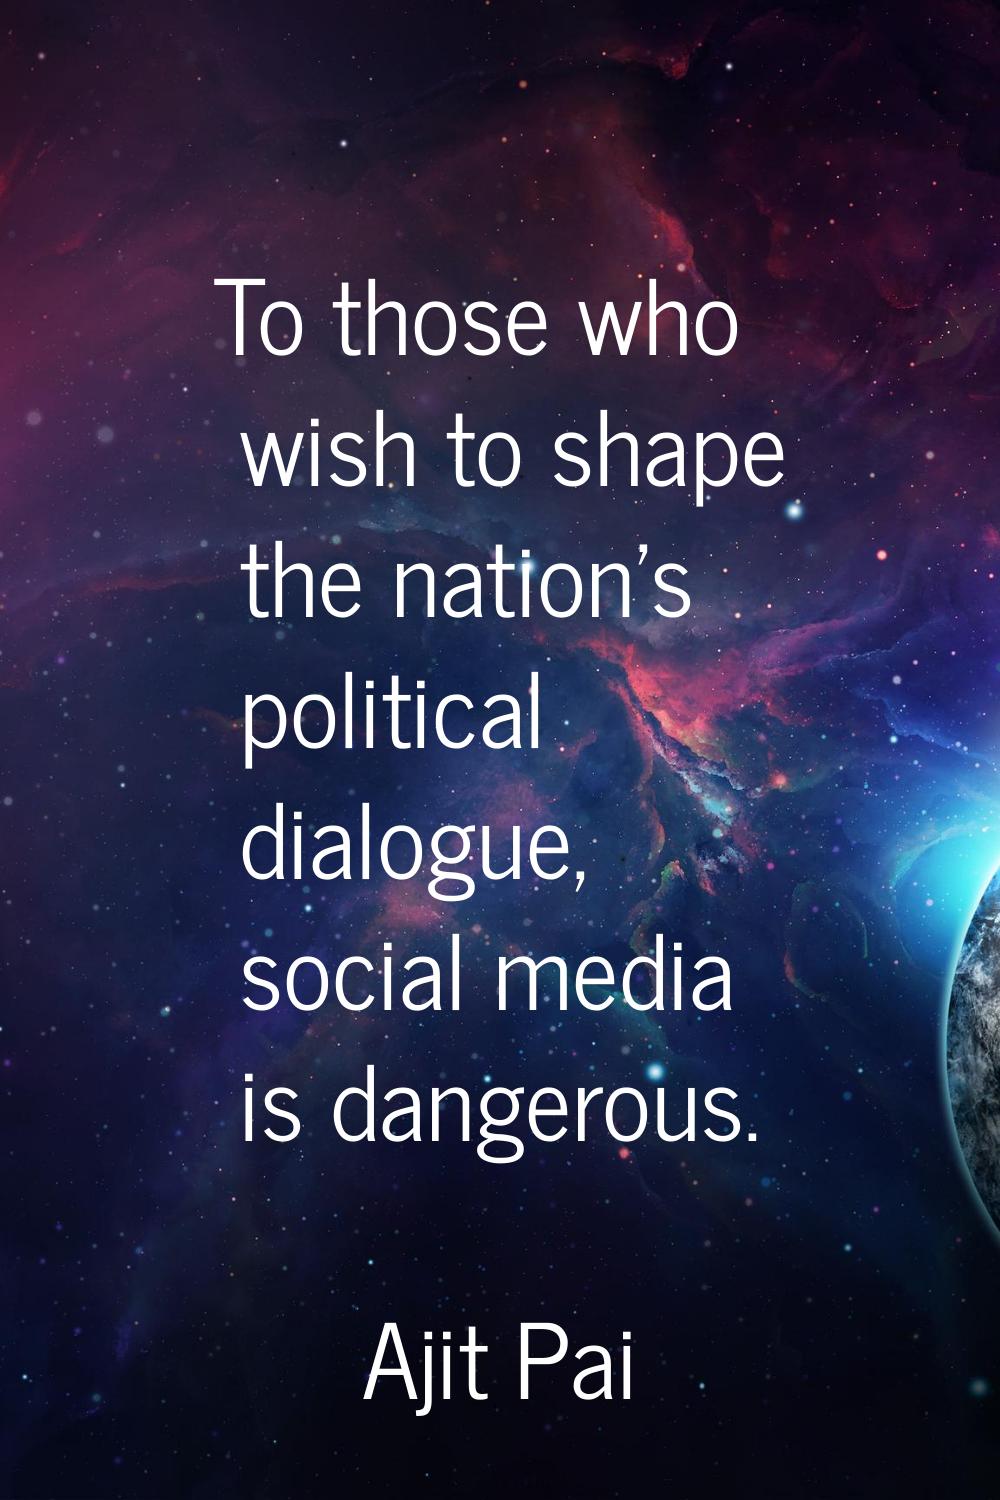 To those who wish to shape the nation's political dialogue, social media is dangerous.